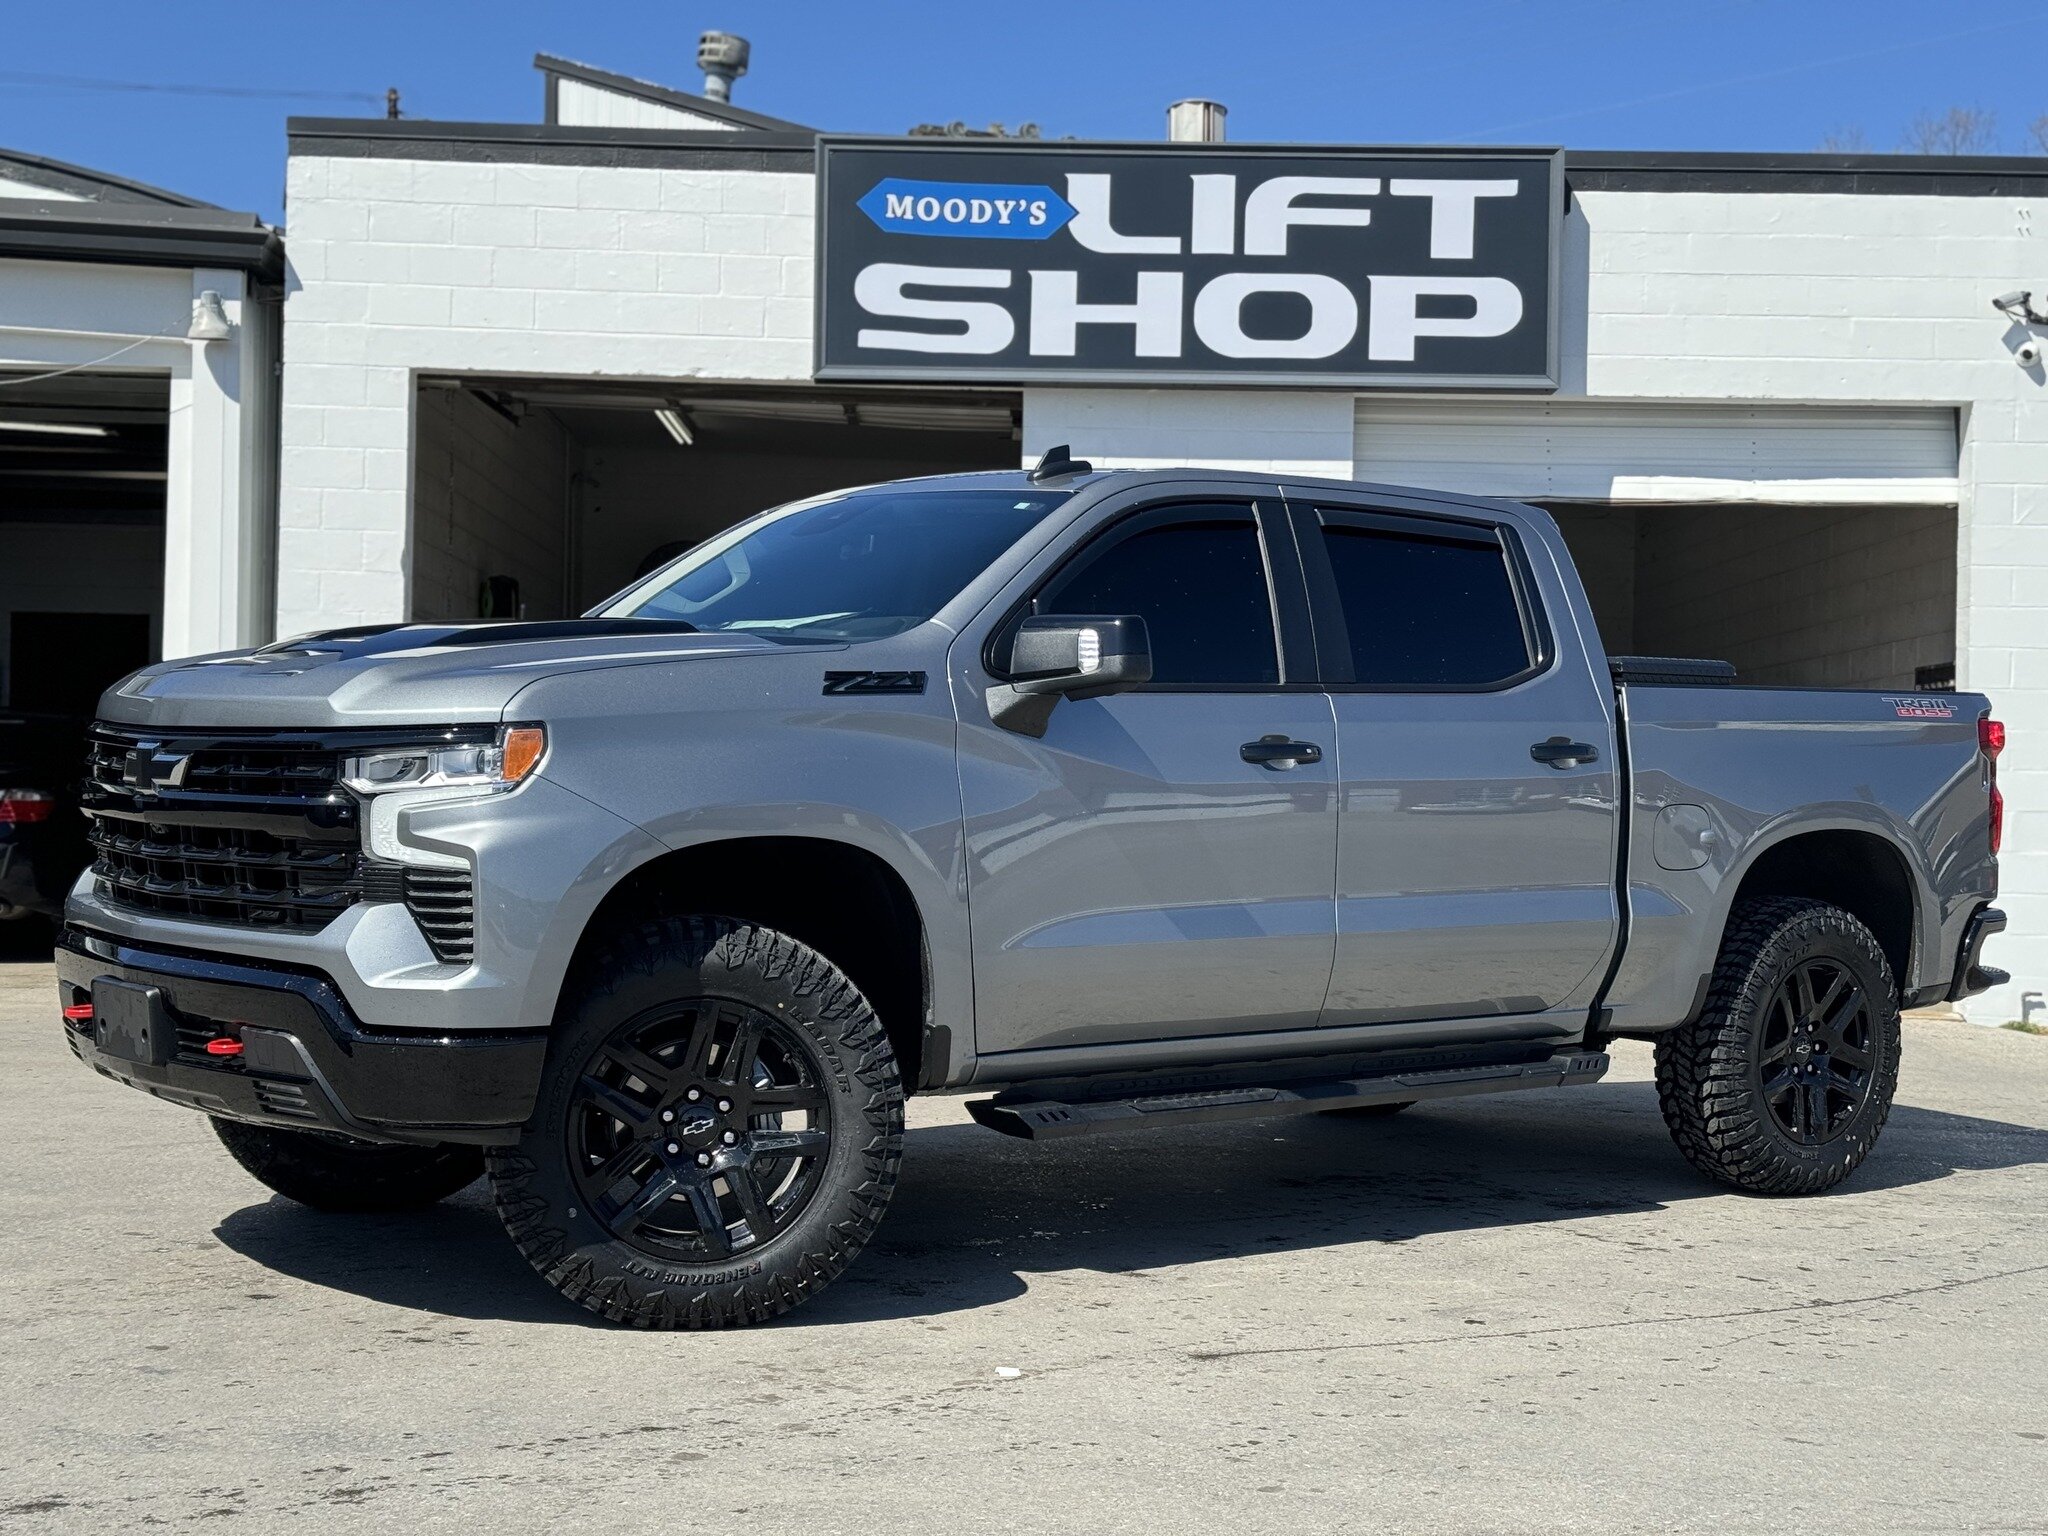 🛻 '23 Chevy 1500 Trail Boss from the Shop: 
- 2.5&rdquo; Zone Leveling Kit with Upper Control Arms 
- 35x11.50r20 Tires on Factory Rims 
- Rough Country Running Boards 
- Window Tint, match front to back 

📍Moody's Lift Shop